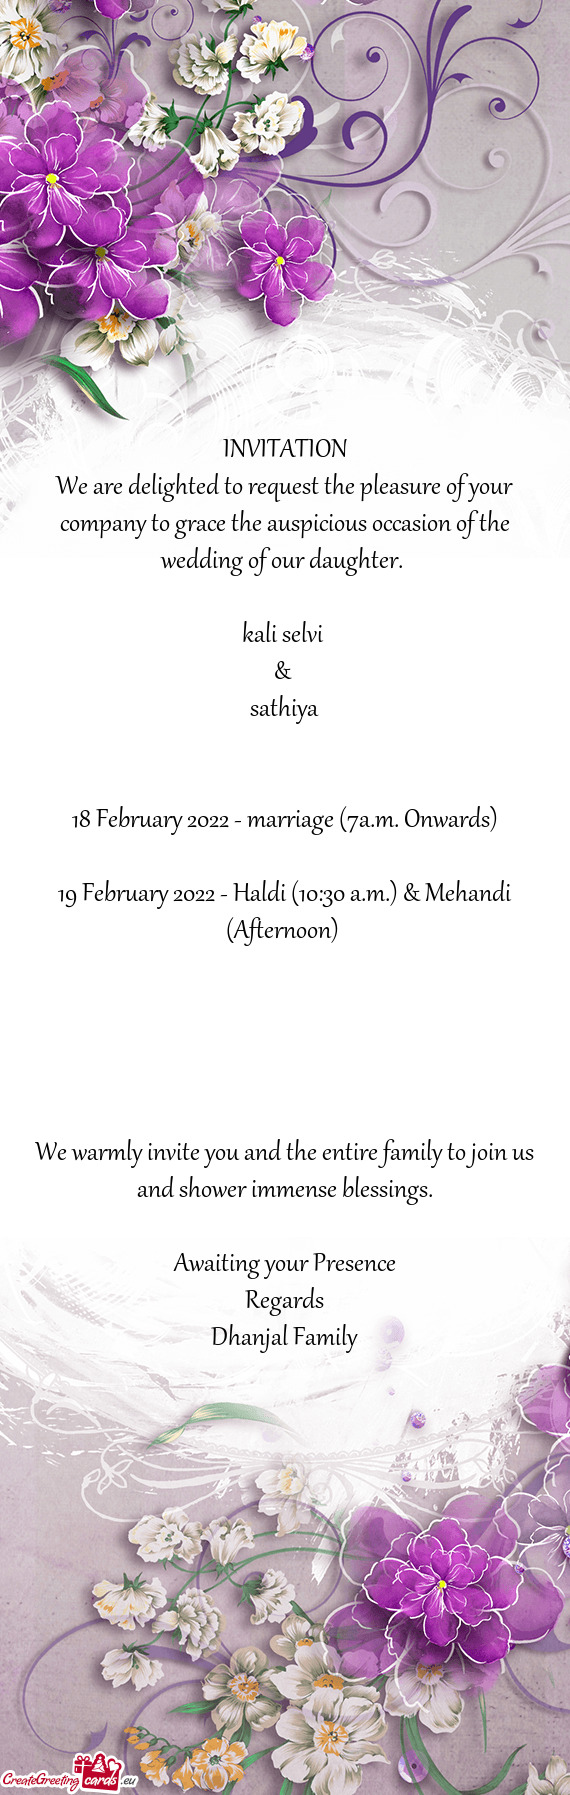 18 February 2022 - marriage (7a.m. Onwards)